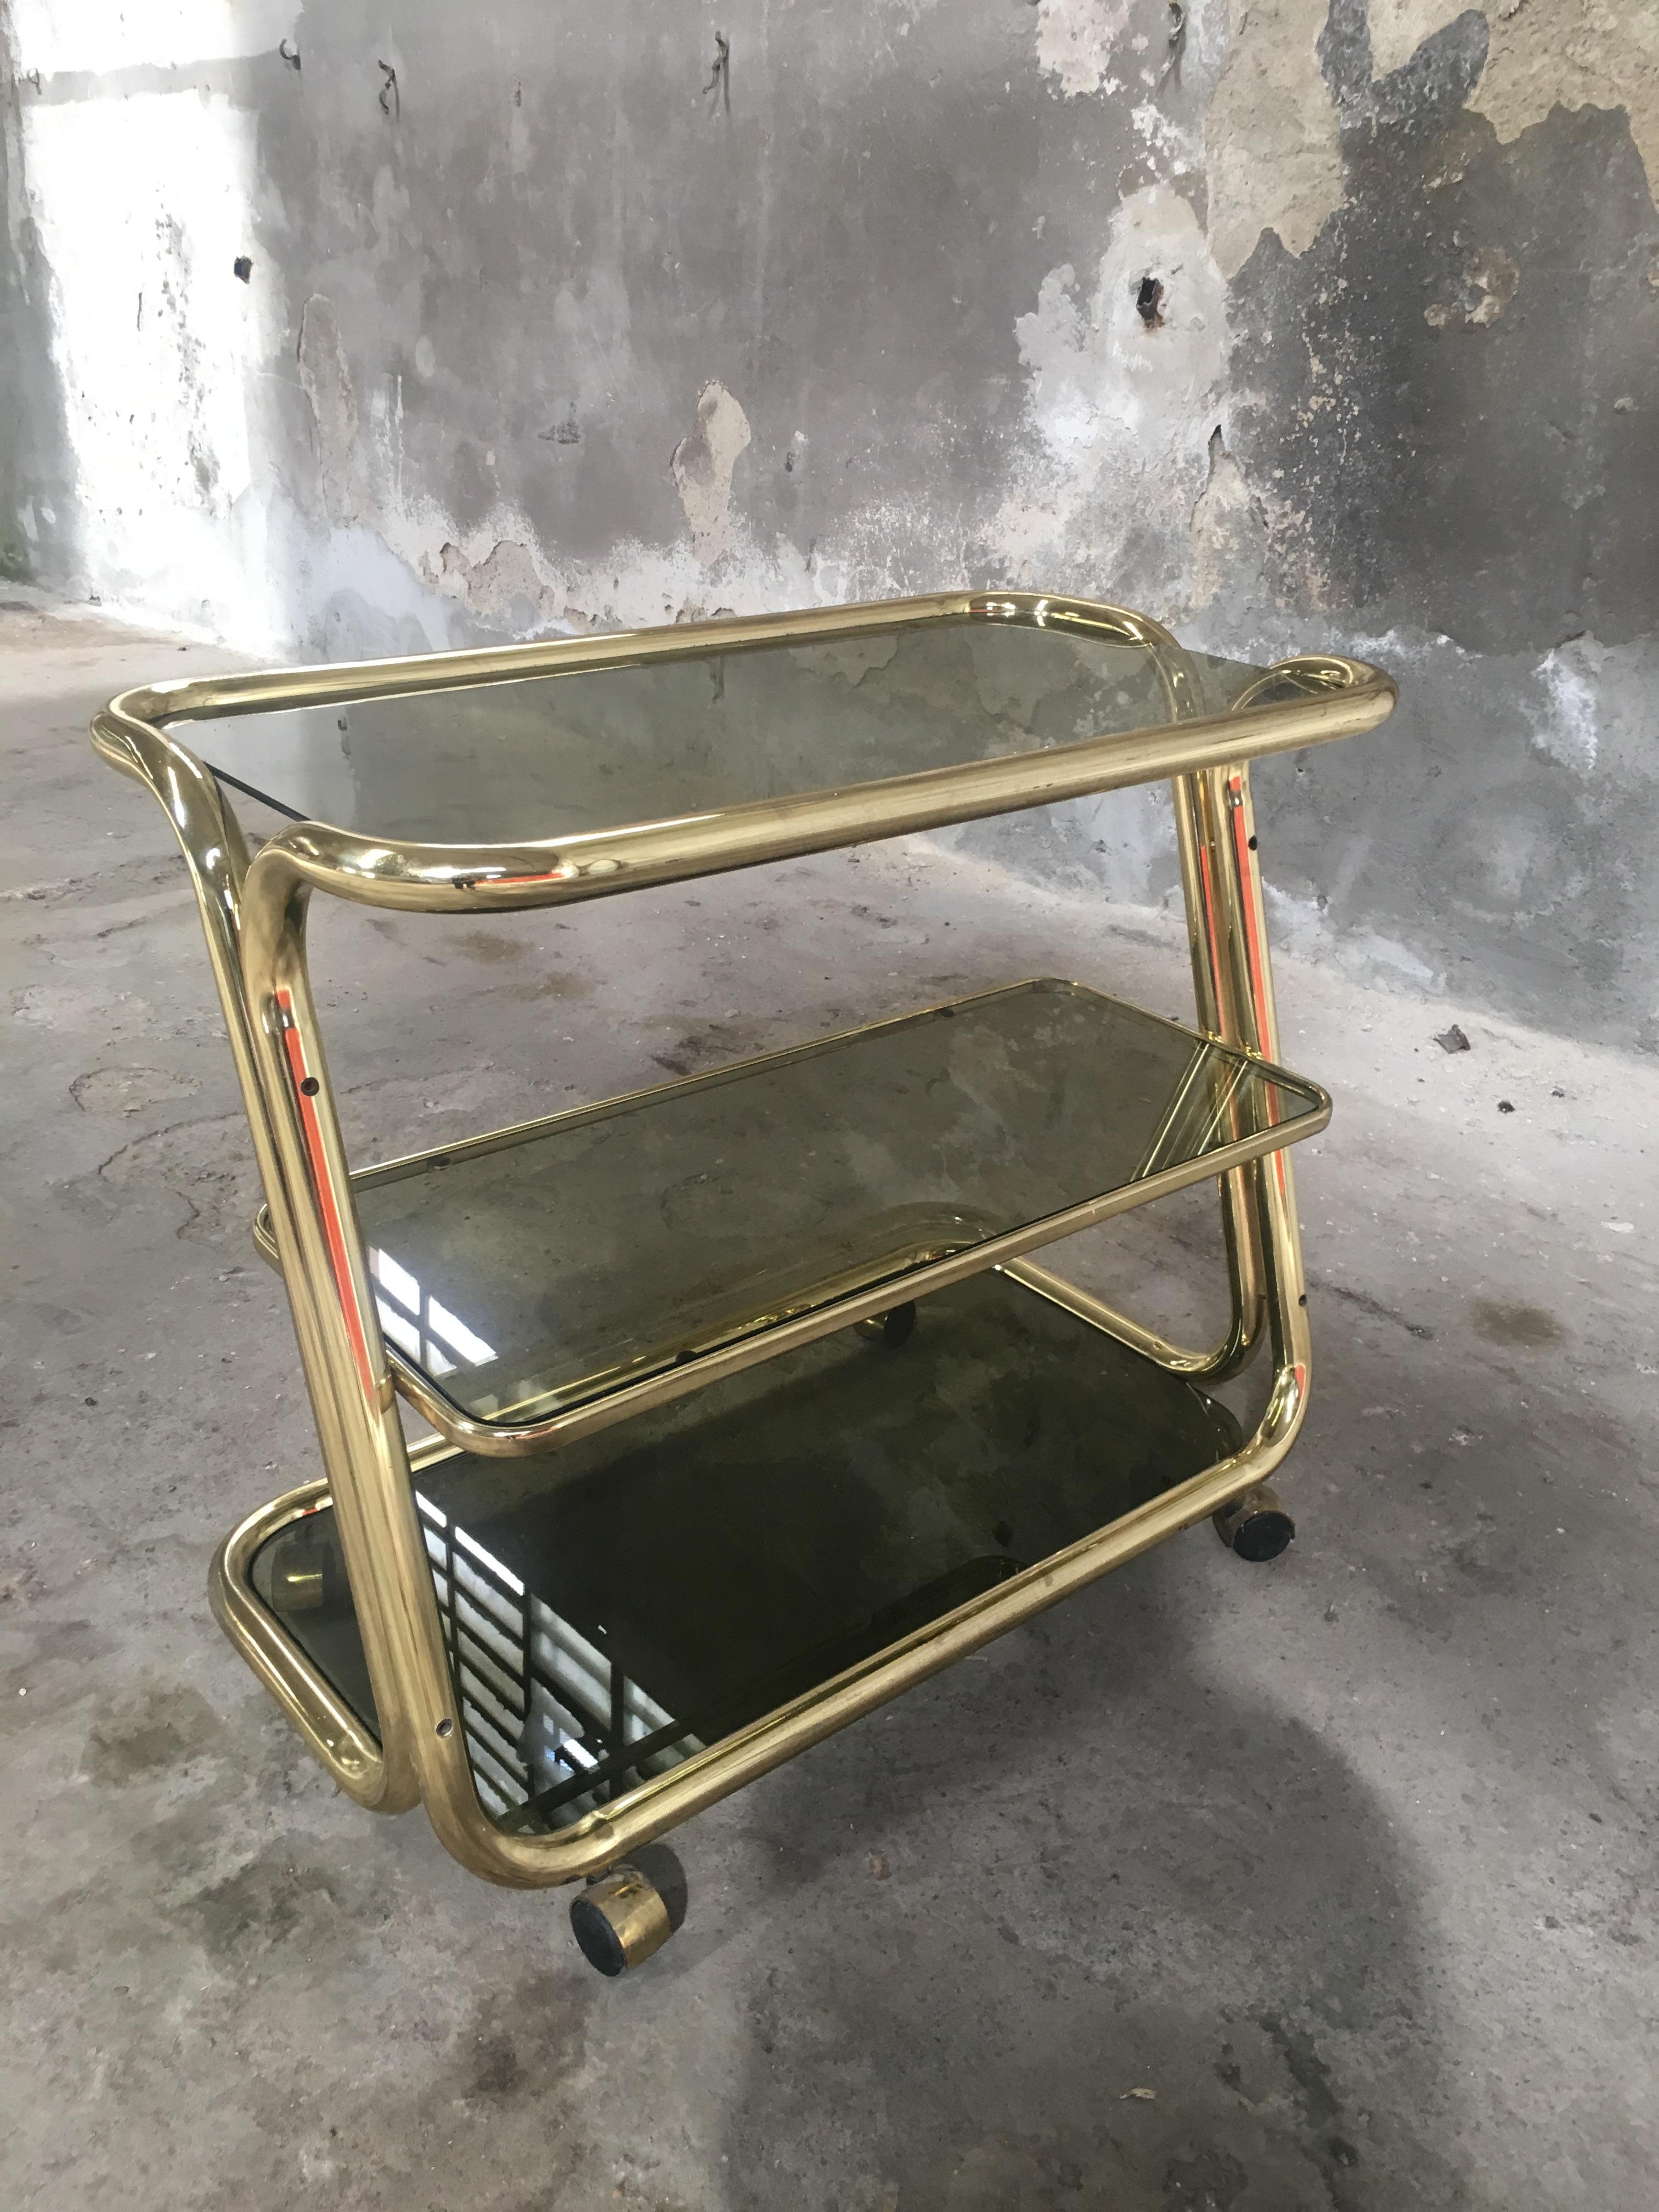 Mid-Century Modern Italian brass metal bar cart with smoked glass shelves from 1970s.